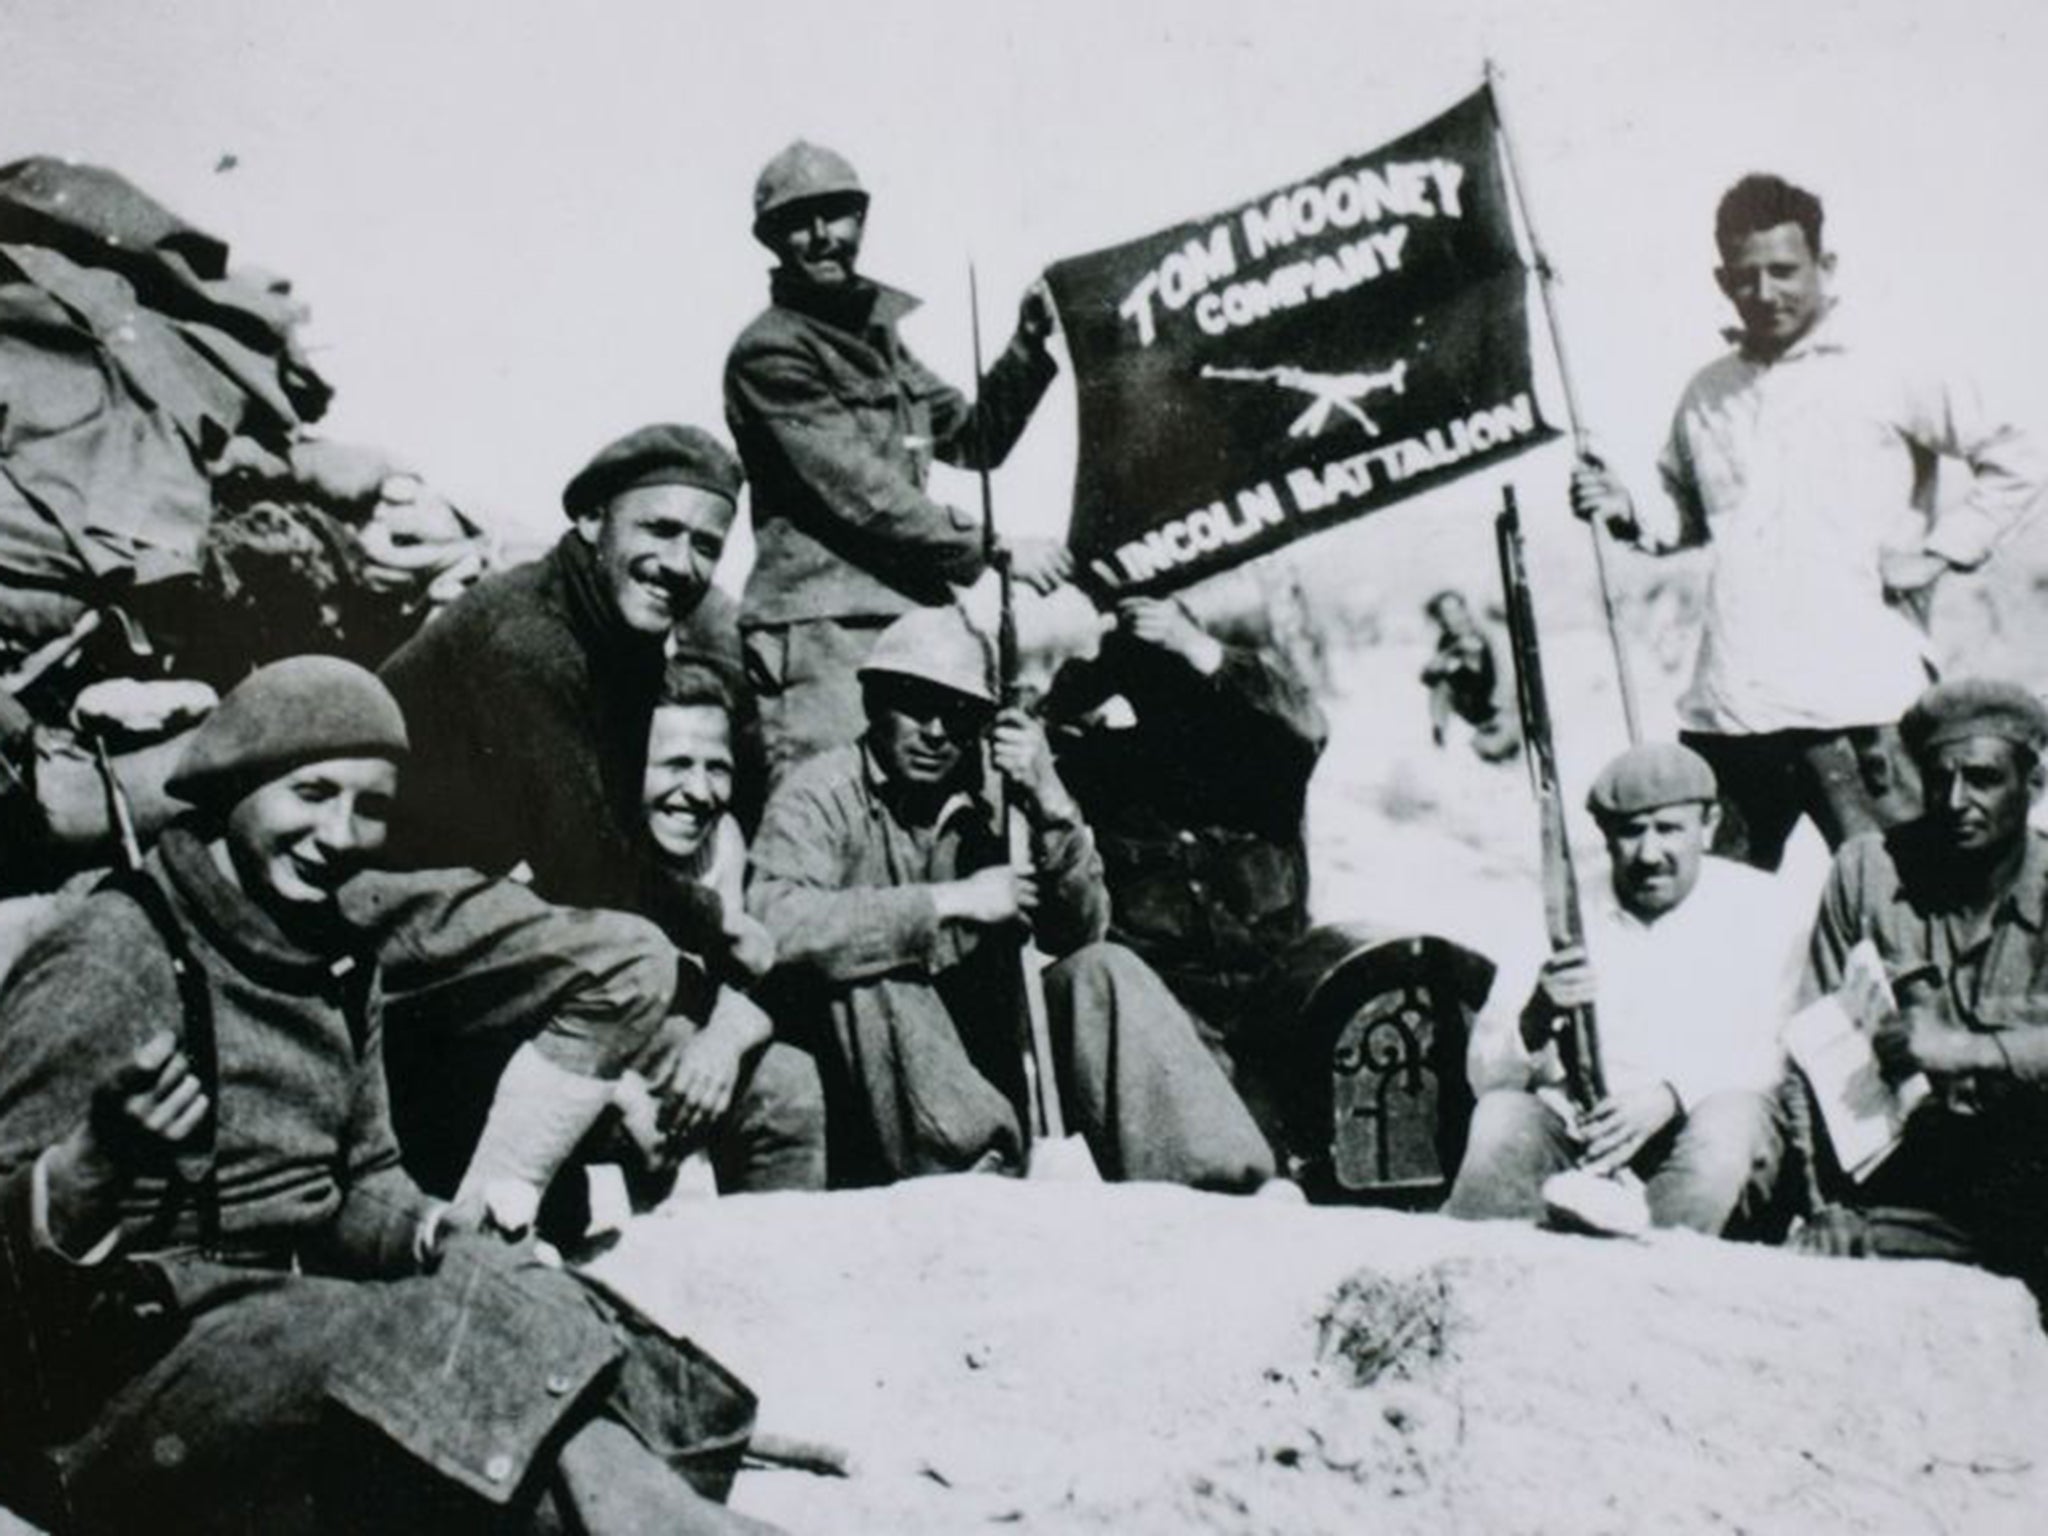 Members of the Tom Mooney machine gun company, part of the Lincoln Battalion, in Jarama in 1937